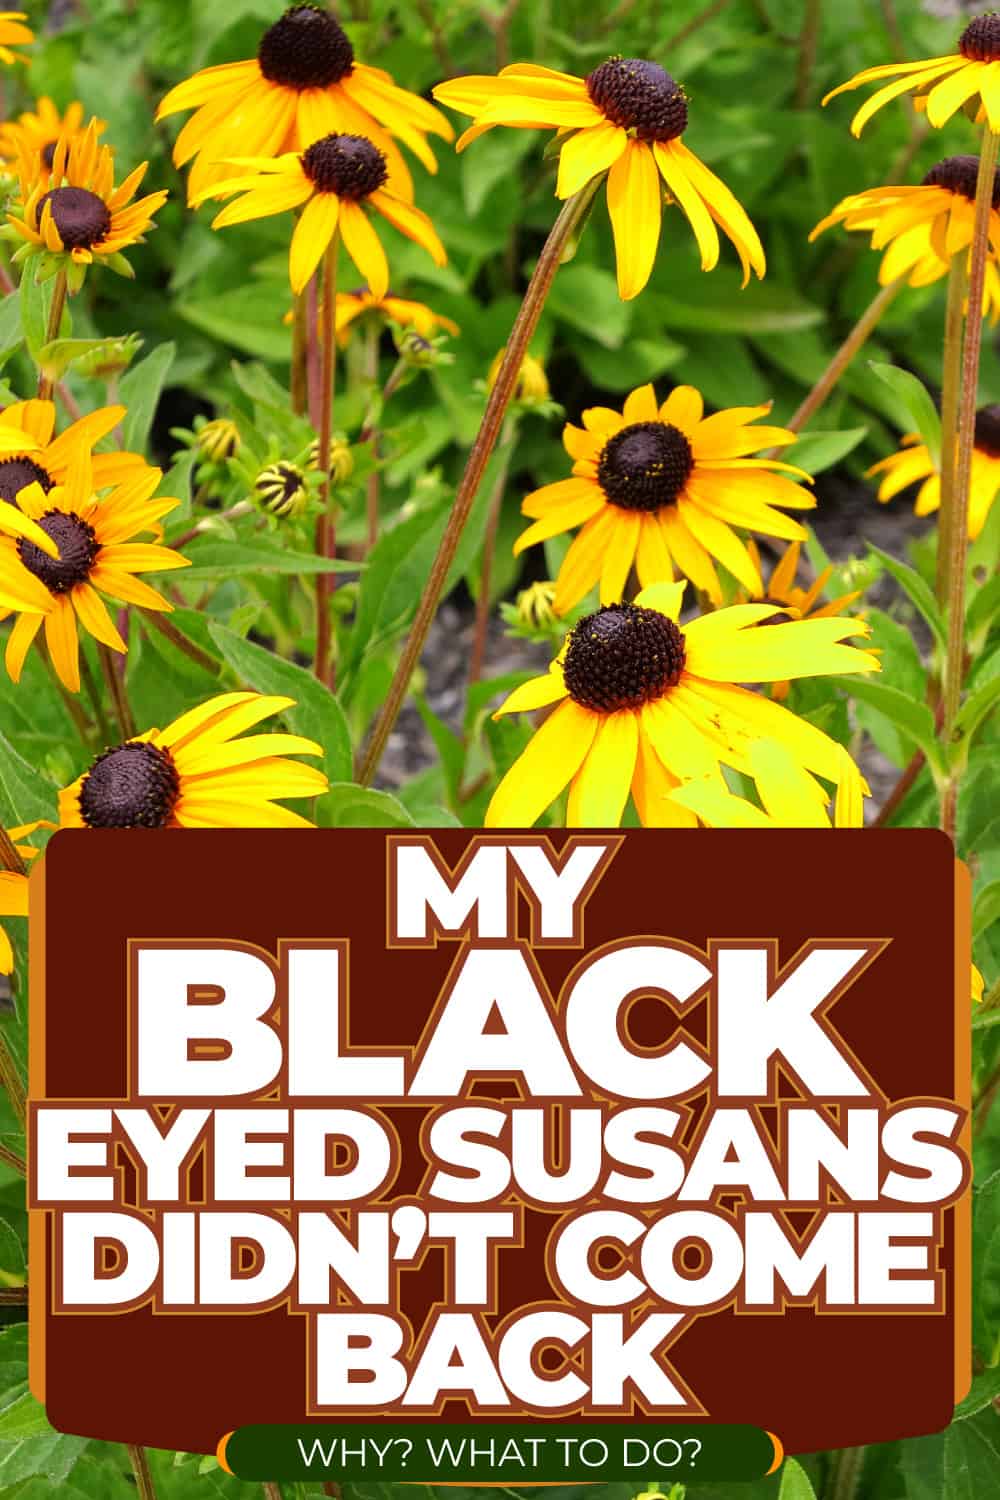 My Black Eyed Susans Didn't Come Back - Why? What To Do?